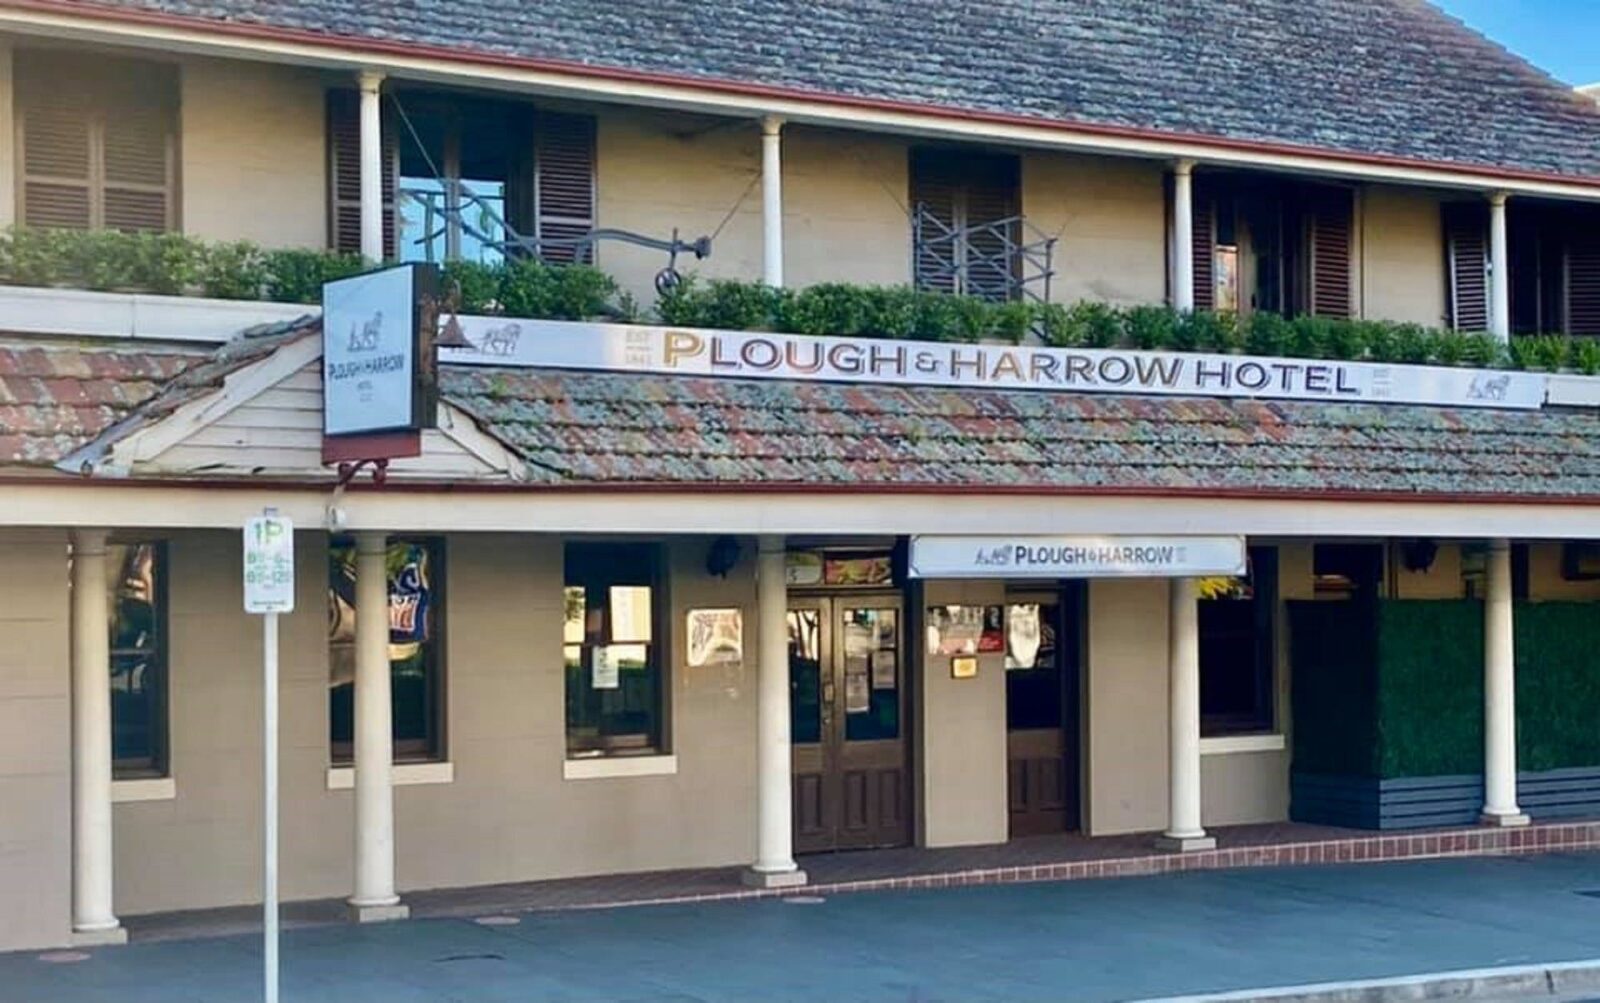 Front facade of the old Plough and Harrow